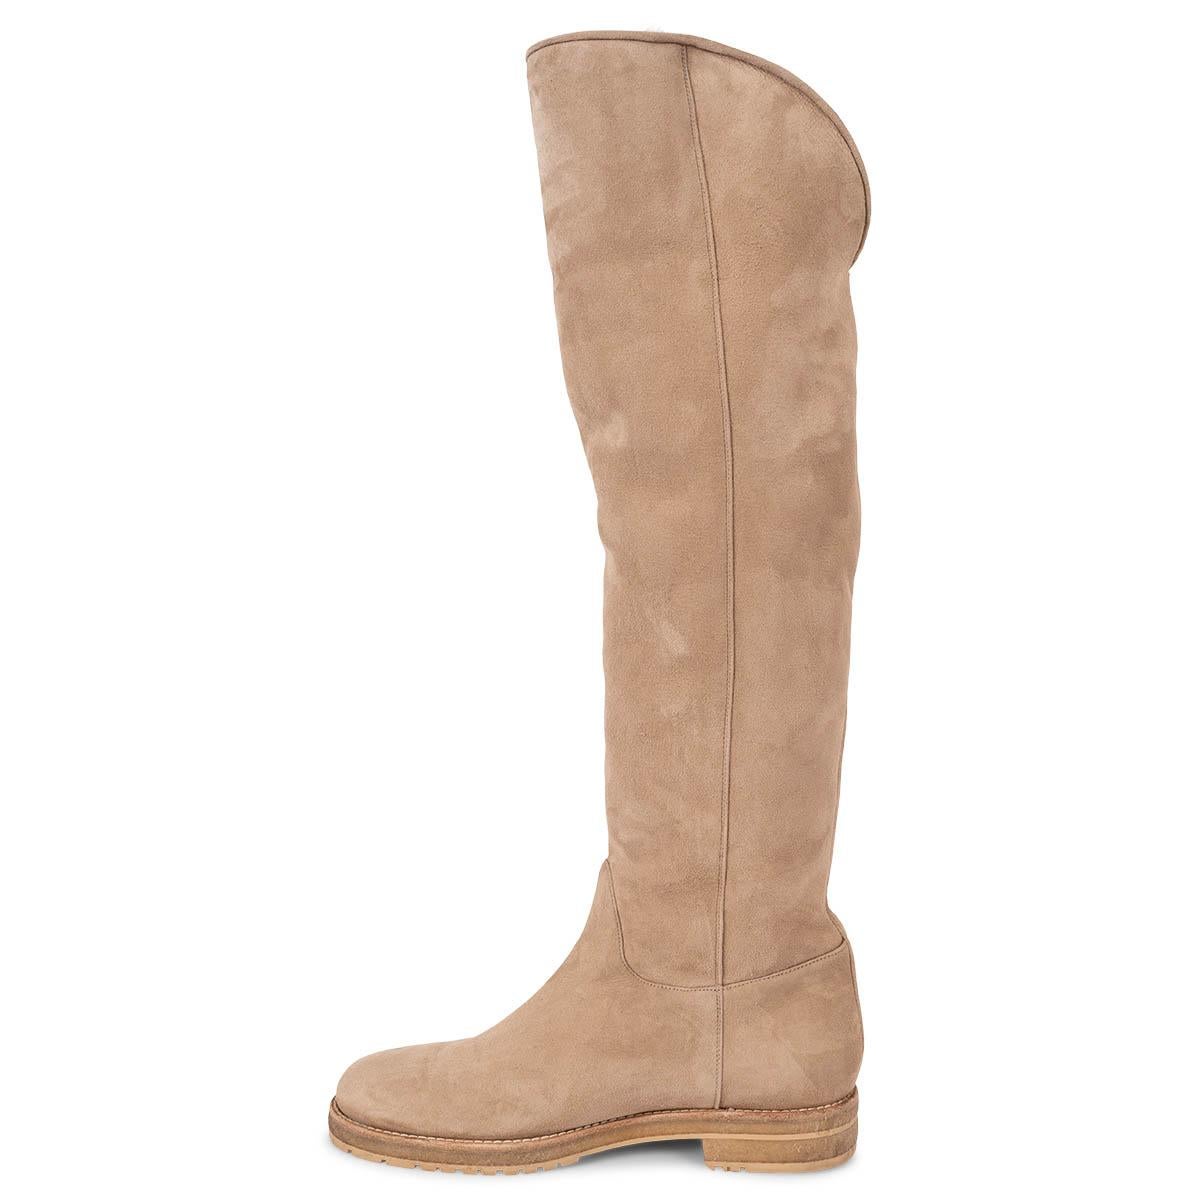 LORO PIANA beige SHEARLING LINED SUEDE OVER KNEE Boots Shoes 41 In Excellent Condition For Sale In Zürich, CH